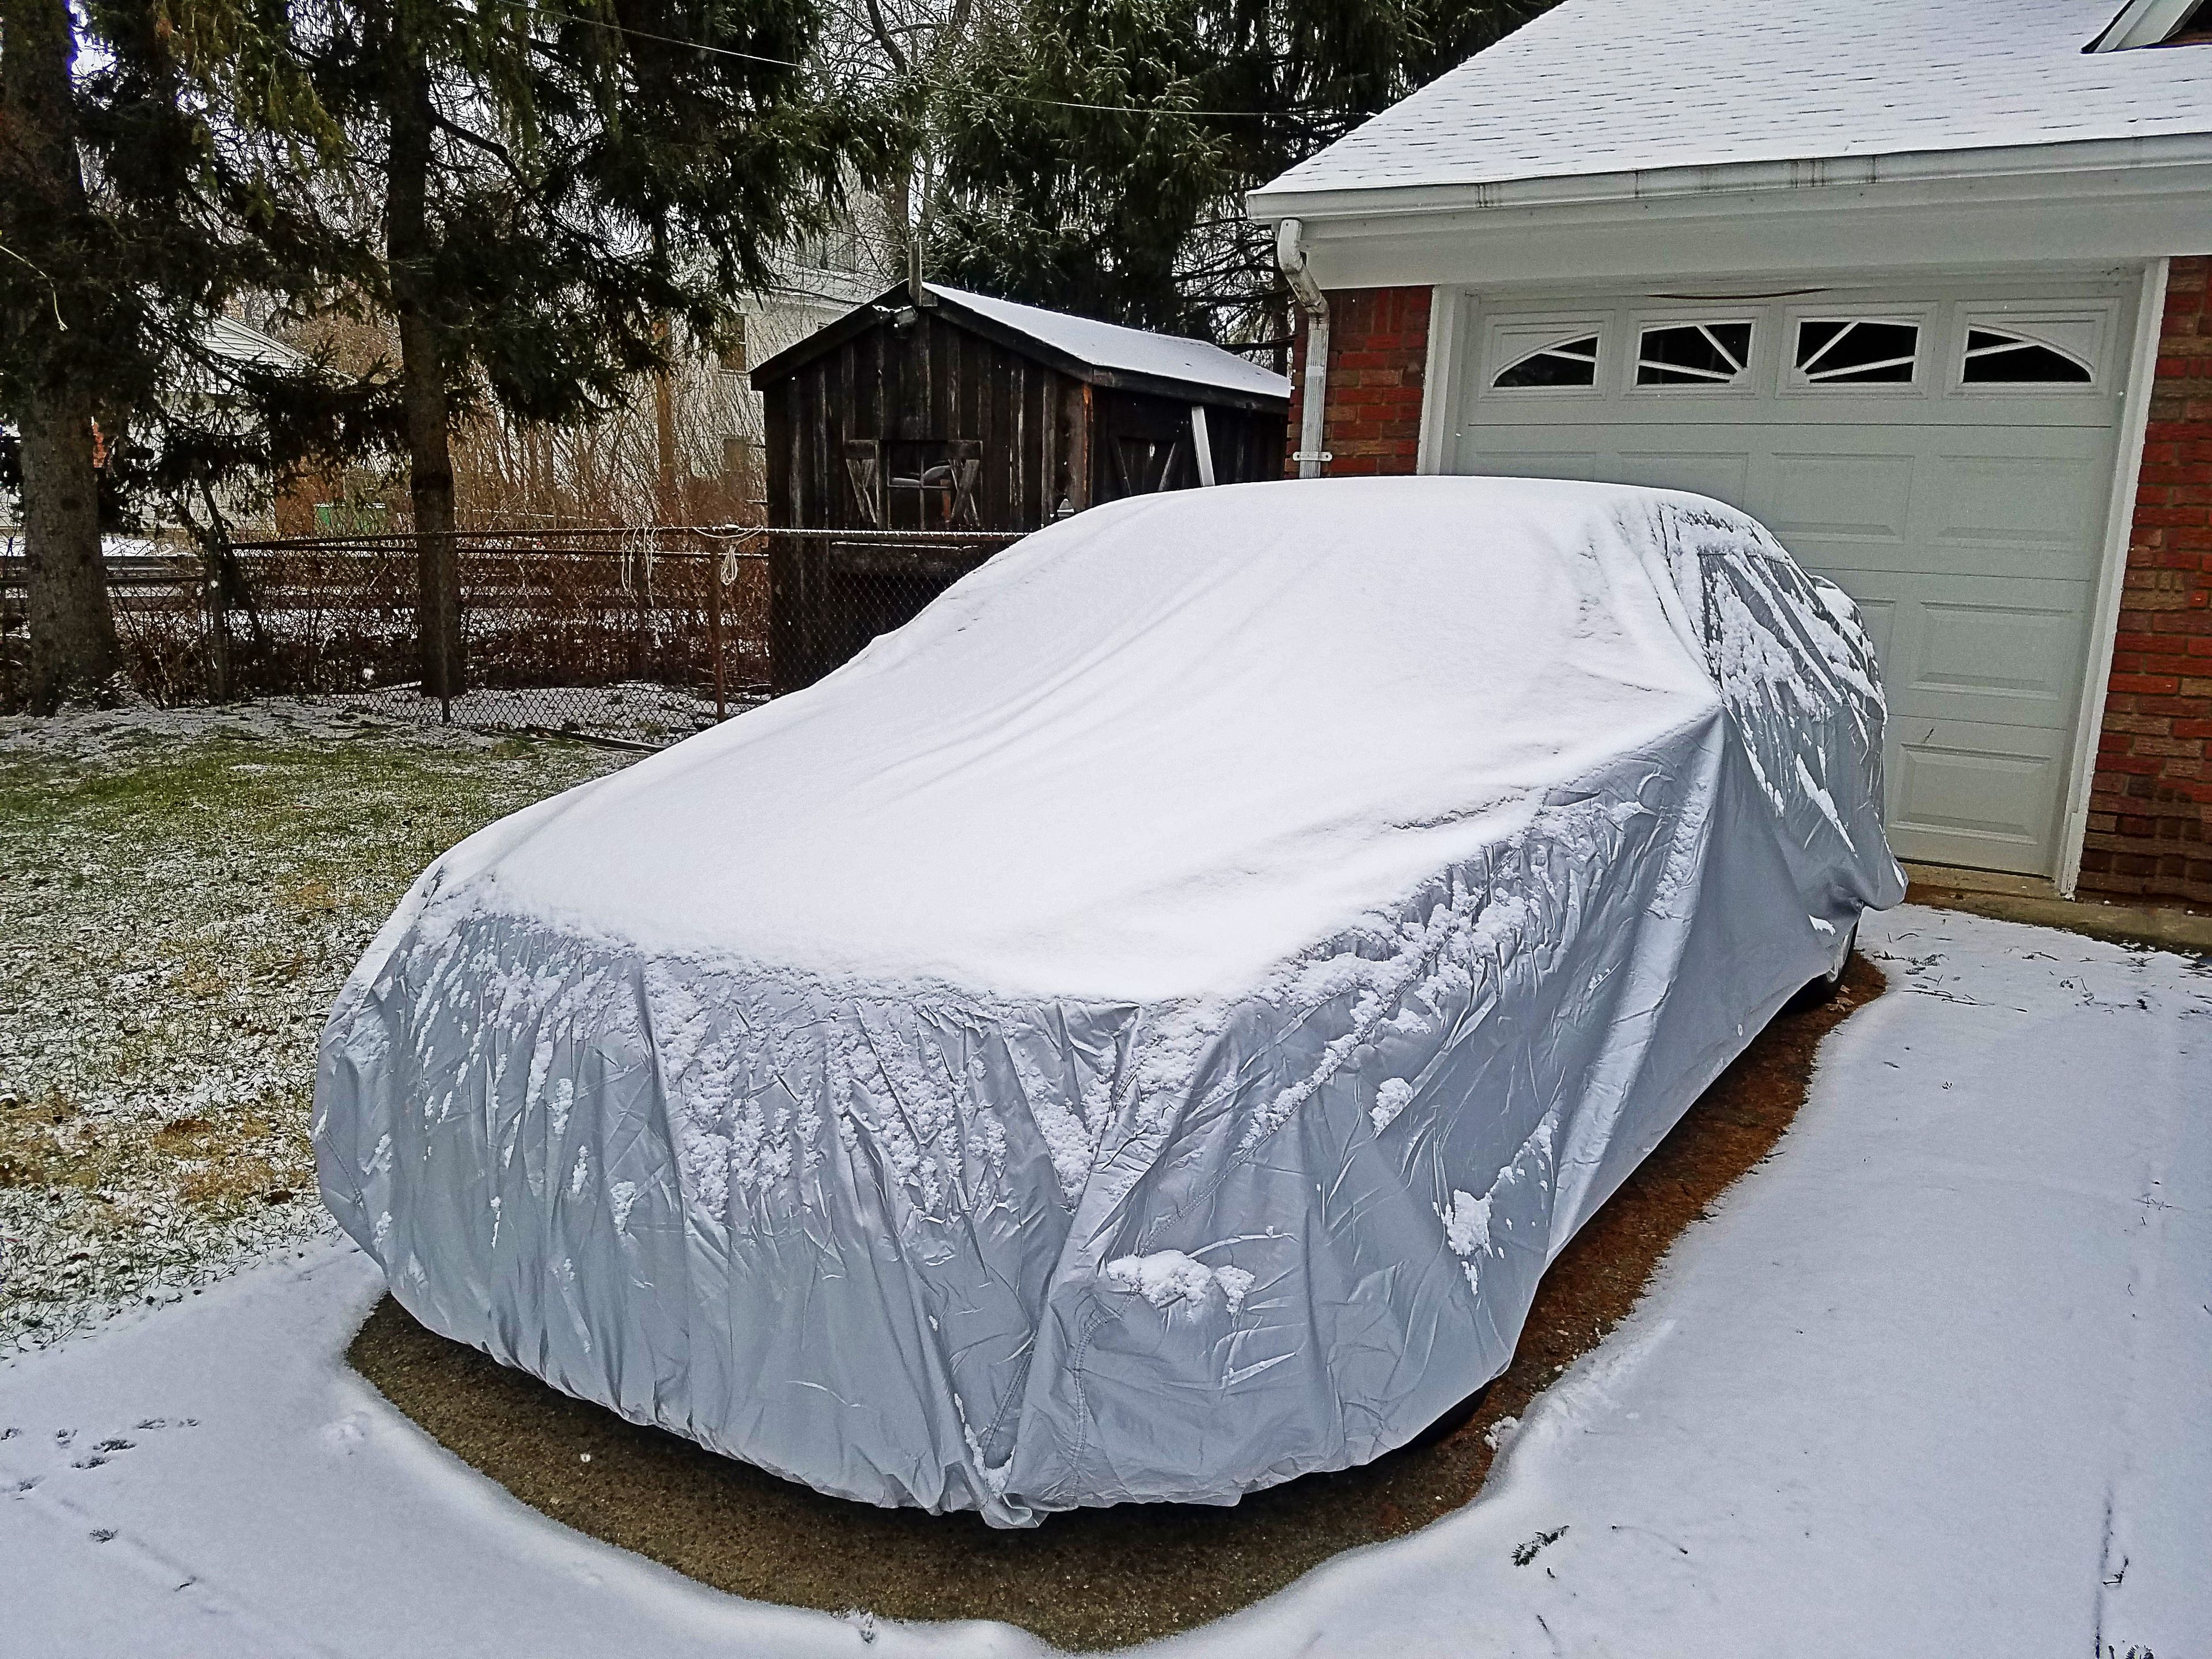 Lanmodo Snow Car Cover -- The Best Way to Save Your Car in Winter